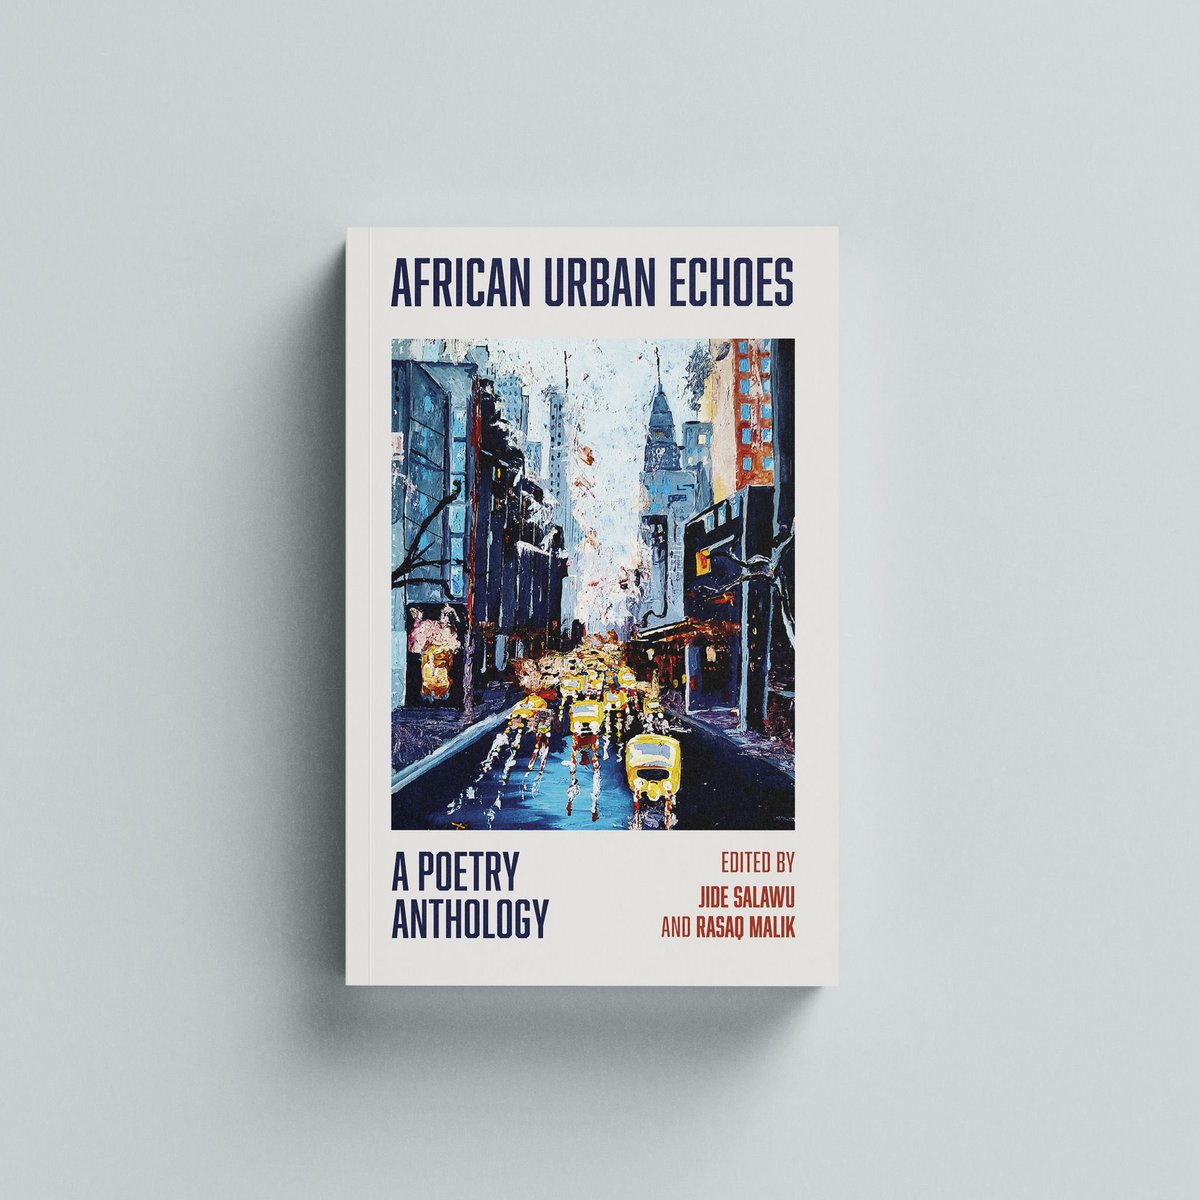 We're excited to have the support of friends, excellent writers, and mentors who are defining African poetic tradition with their masterfully told stories. In AFRICAN URBAN ECHOES, we curated marginal tales of African cities, their hopes, fears, anxieties, and affective layers.